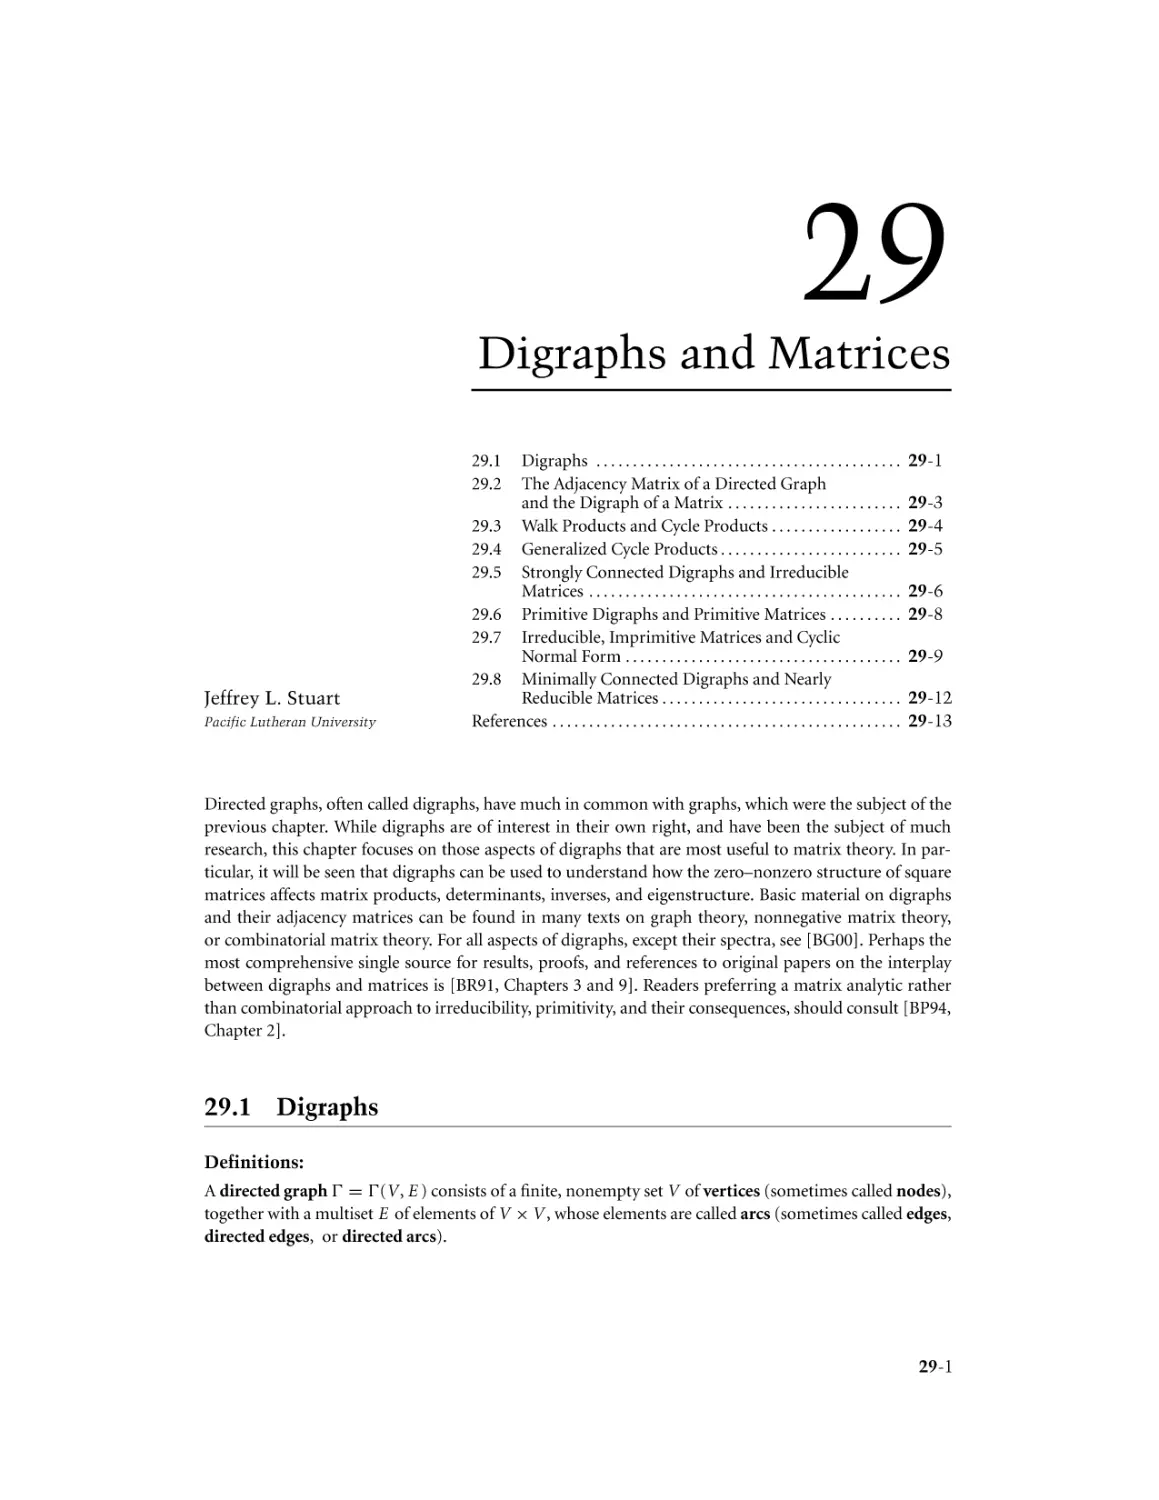 Chapter 29. Digraphs and Matrices